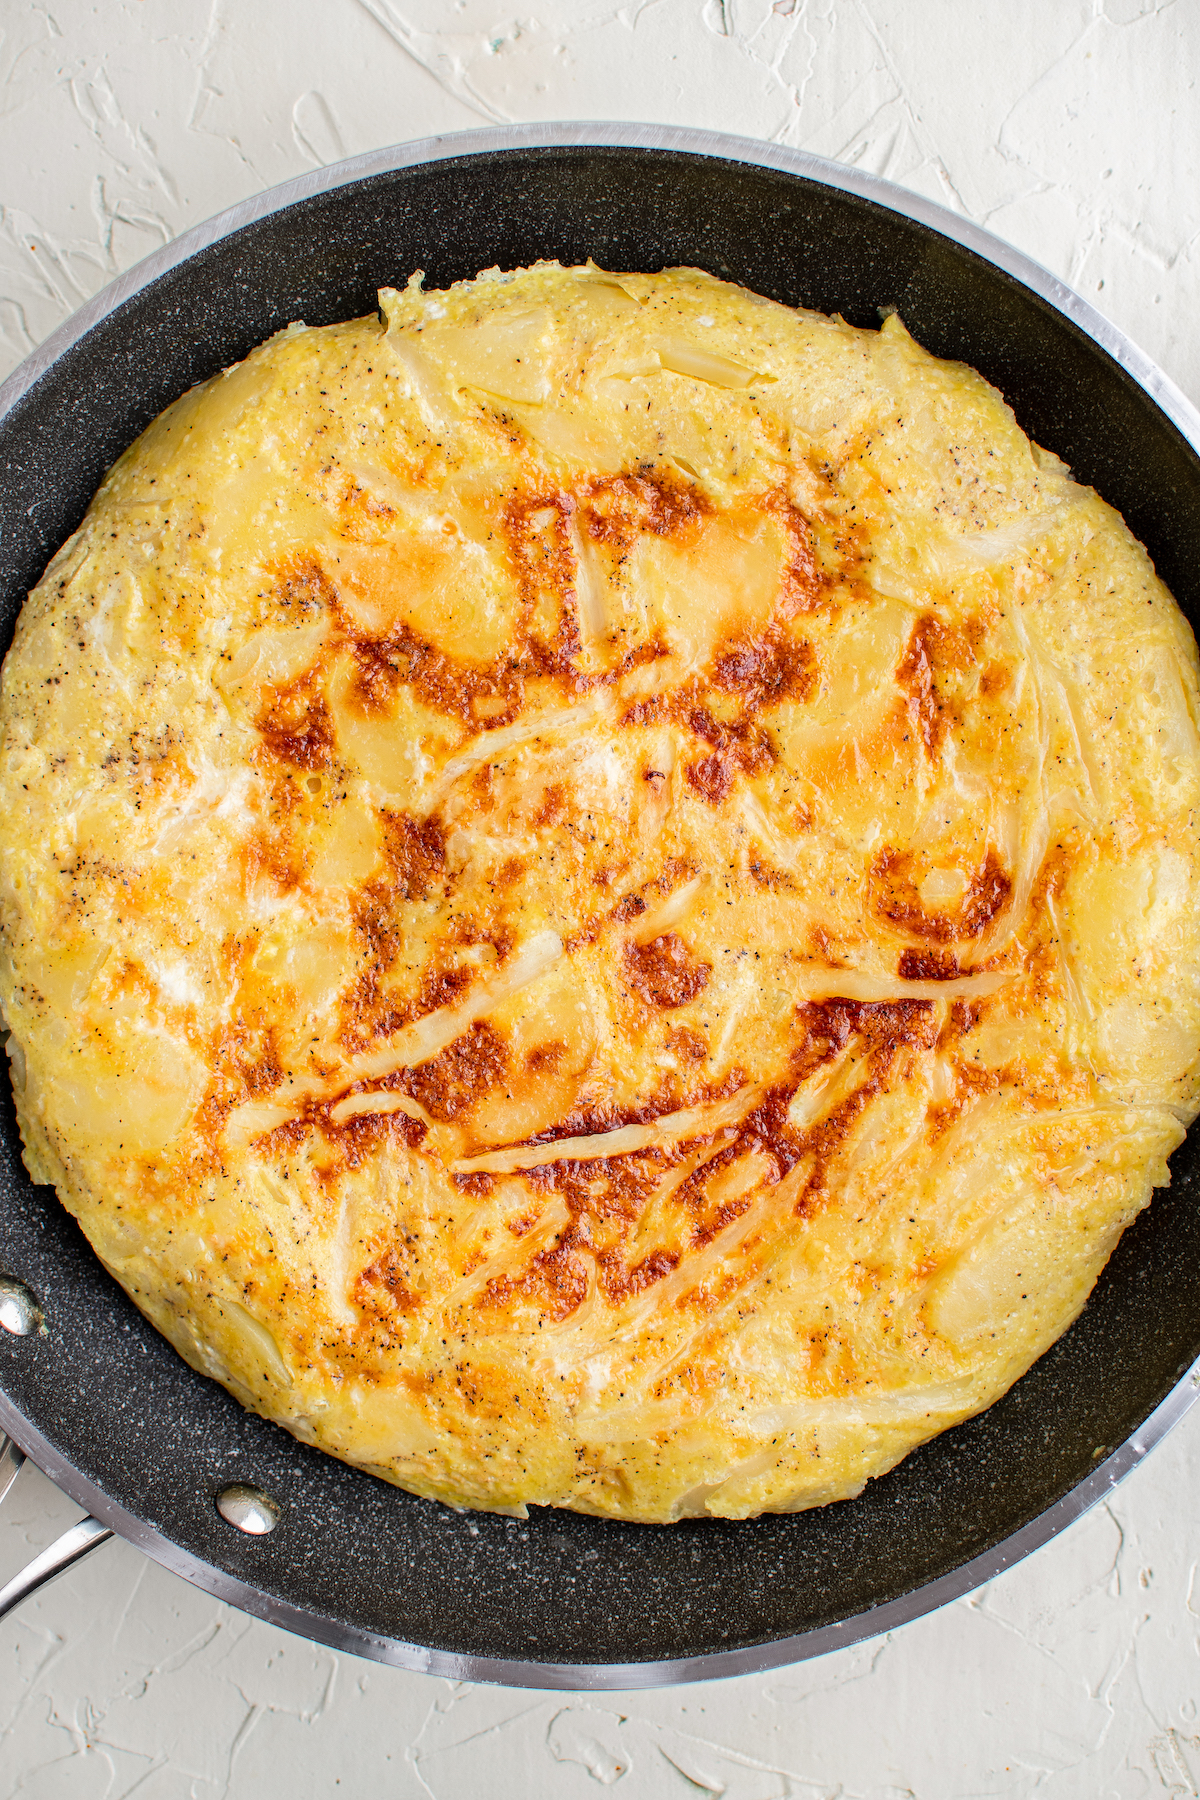 A tortilla española that has been flipped, in a skillet, with a golden exterior